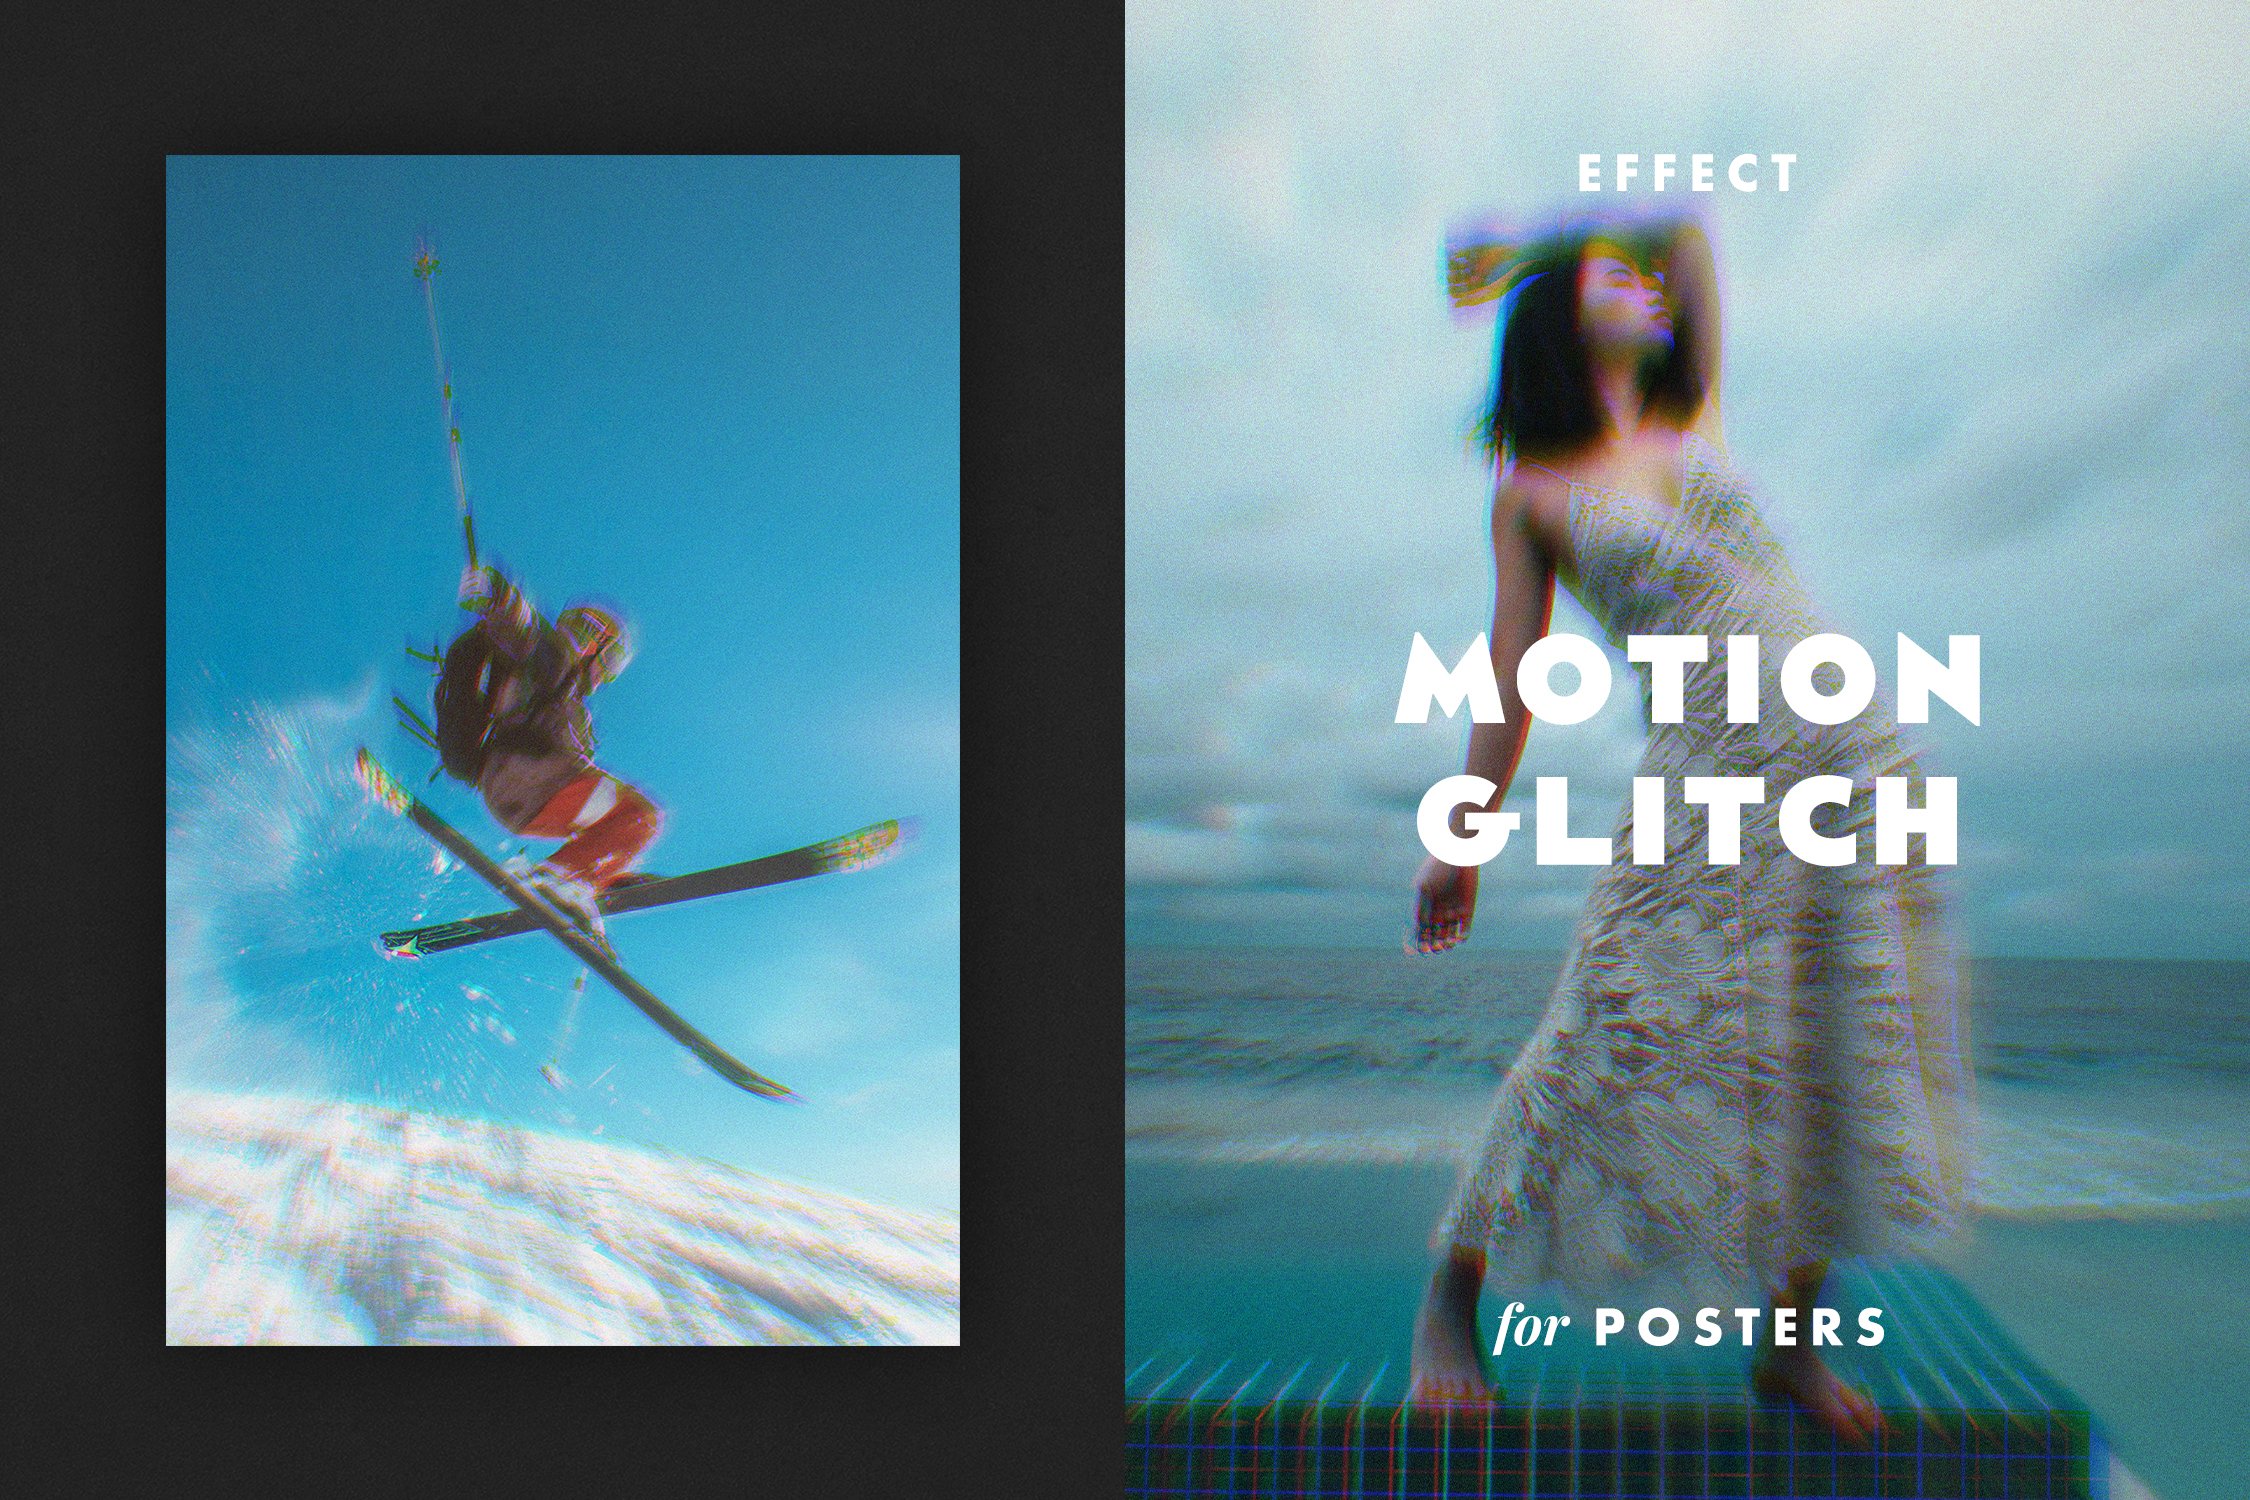 Motion Glitch Effect for Posterscover image.